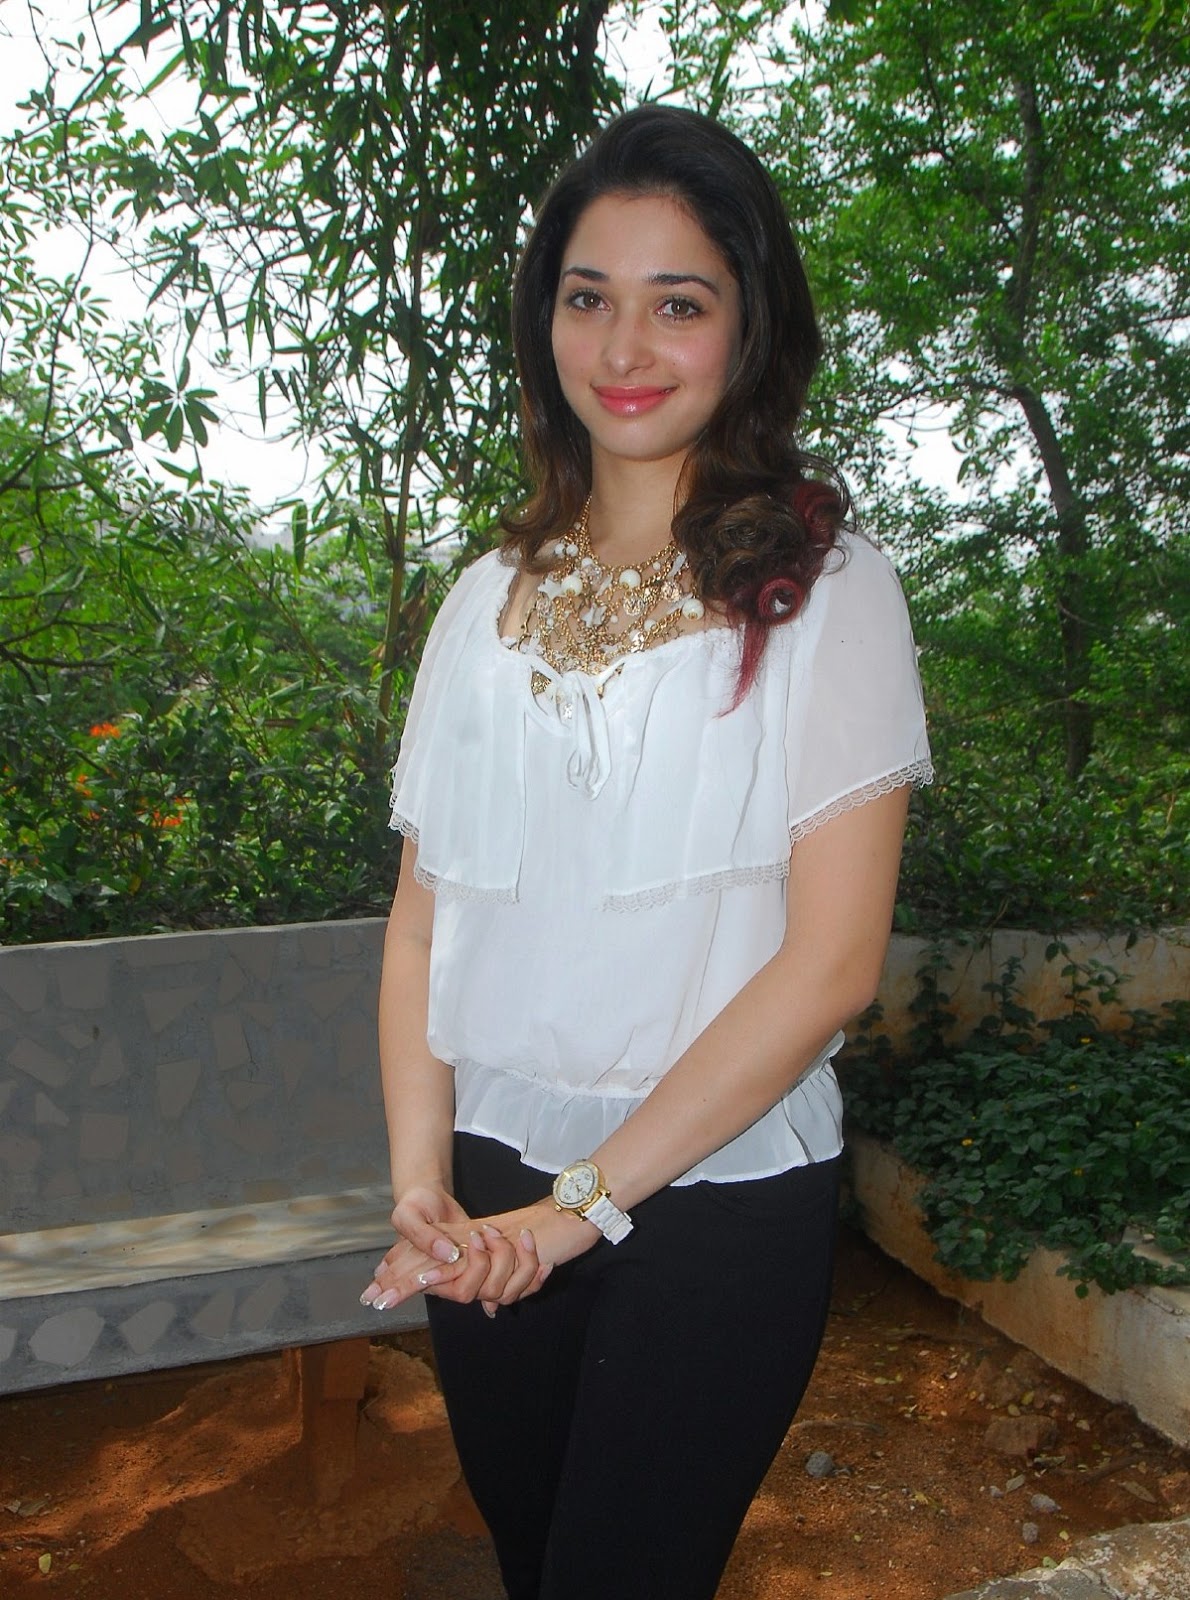 High Quality Bollywood Celebrity Pictures Tamanna Bhatia Looks Super Hot In White Top And Black